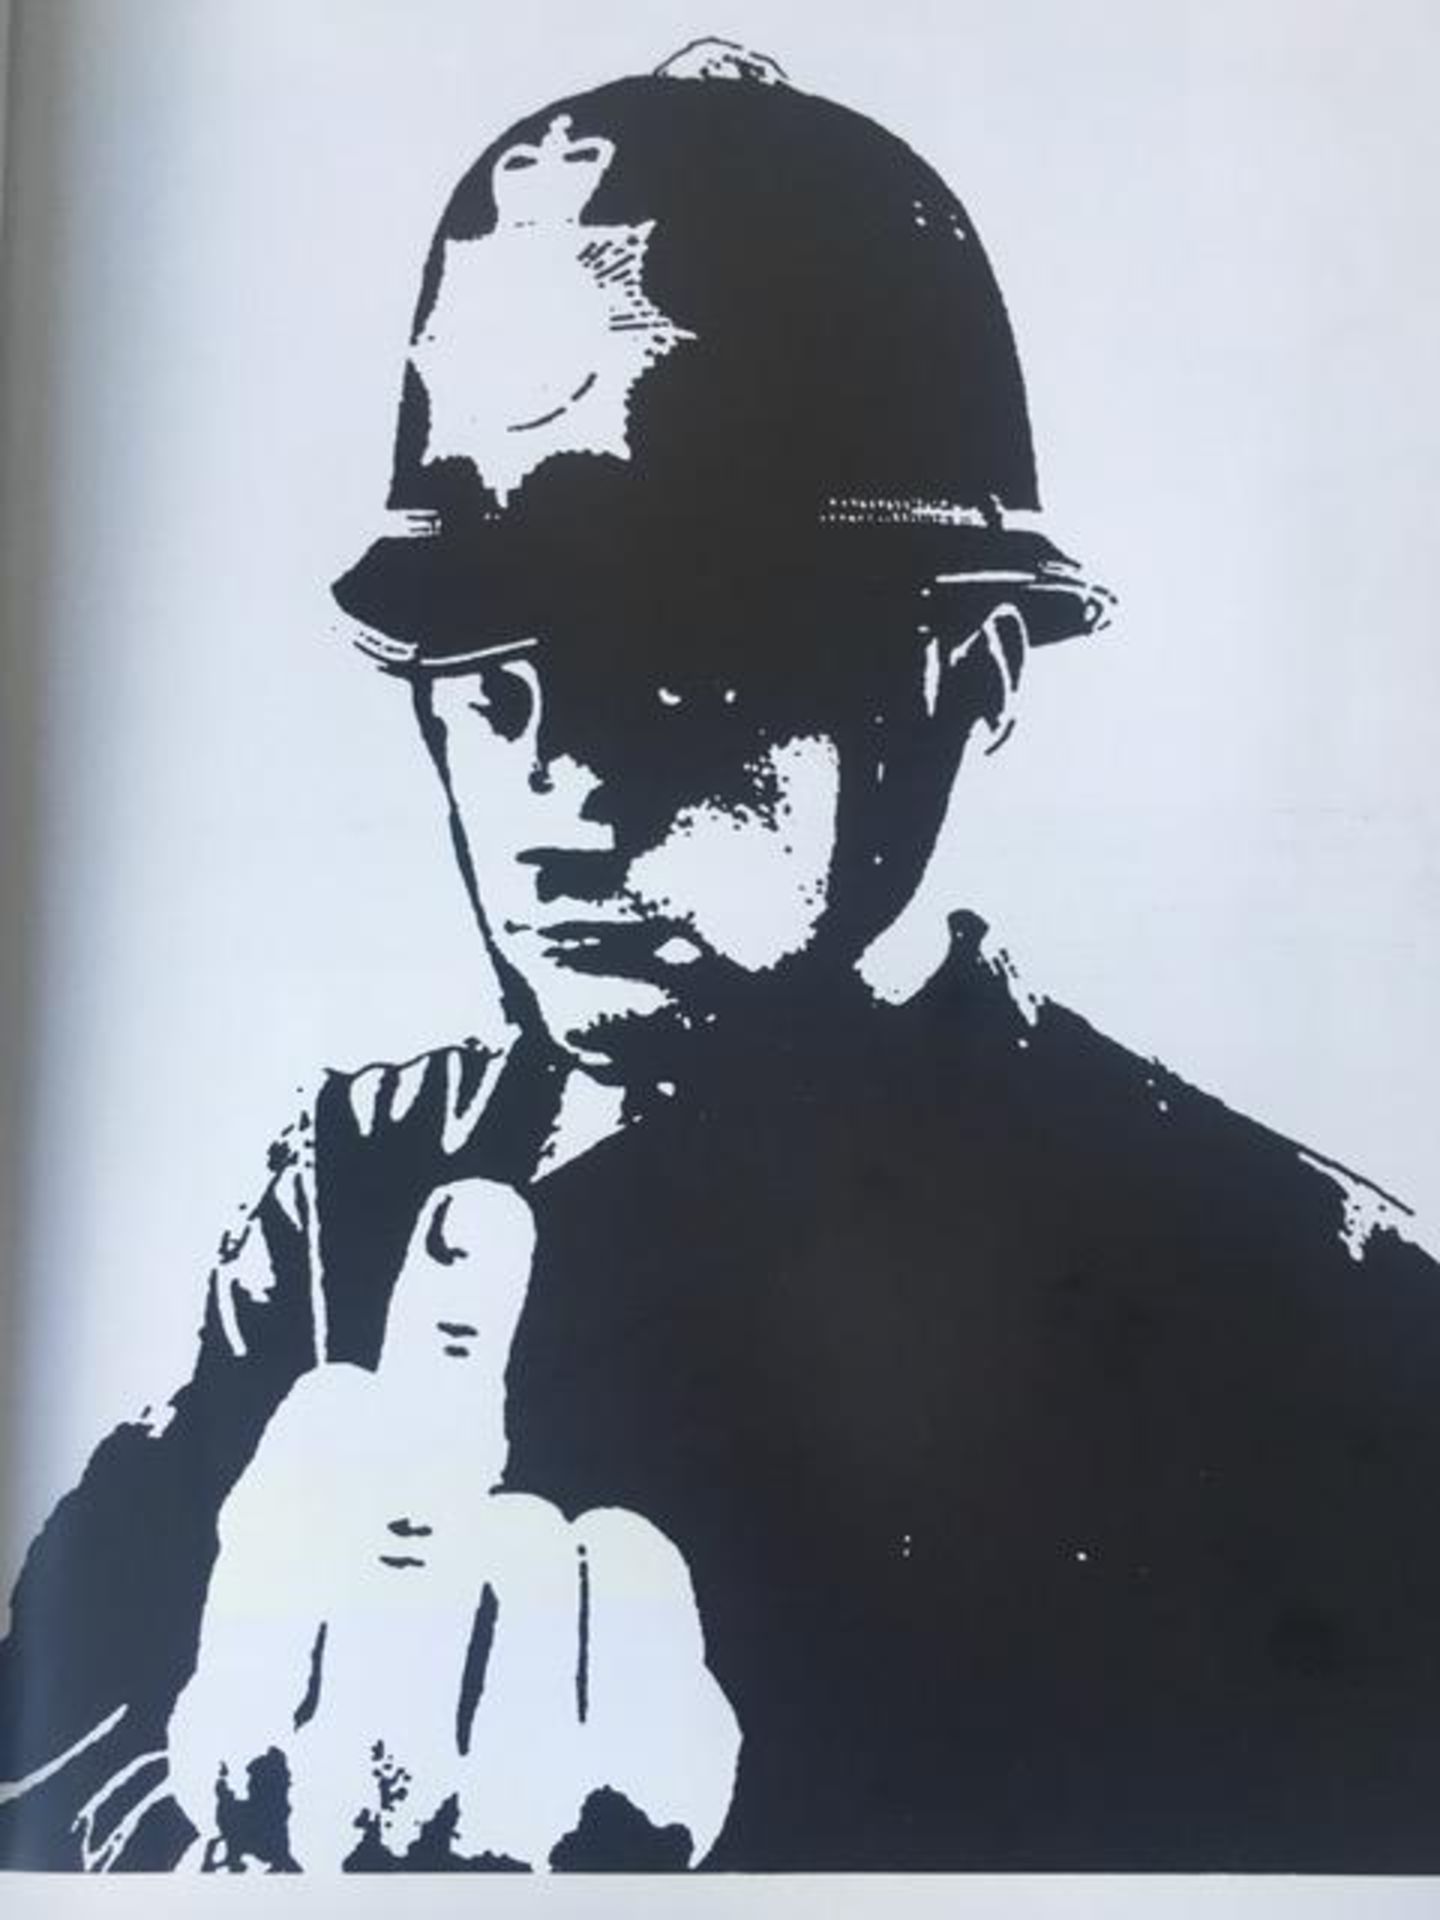 Wall and Piece, By Banksy, Glossy Pages and Card Back, Bound Book, Published, Open Edition, 2005 - Image 3 of 20